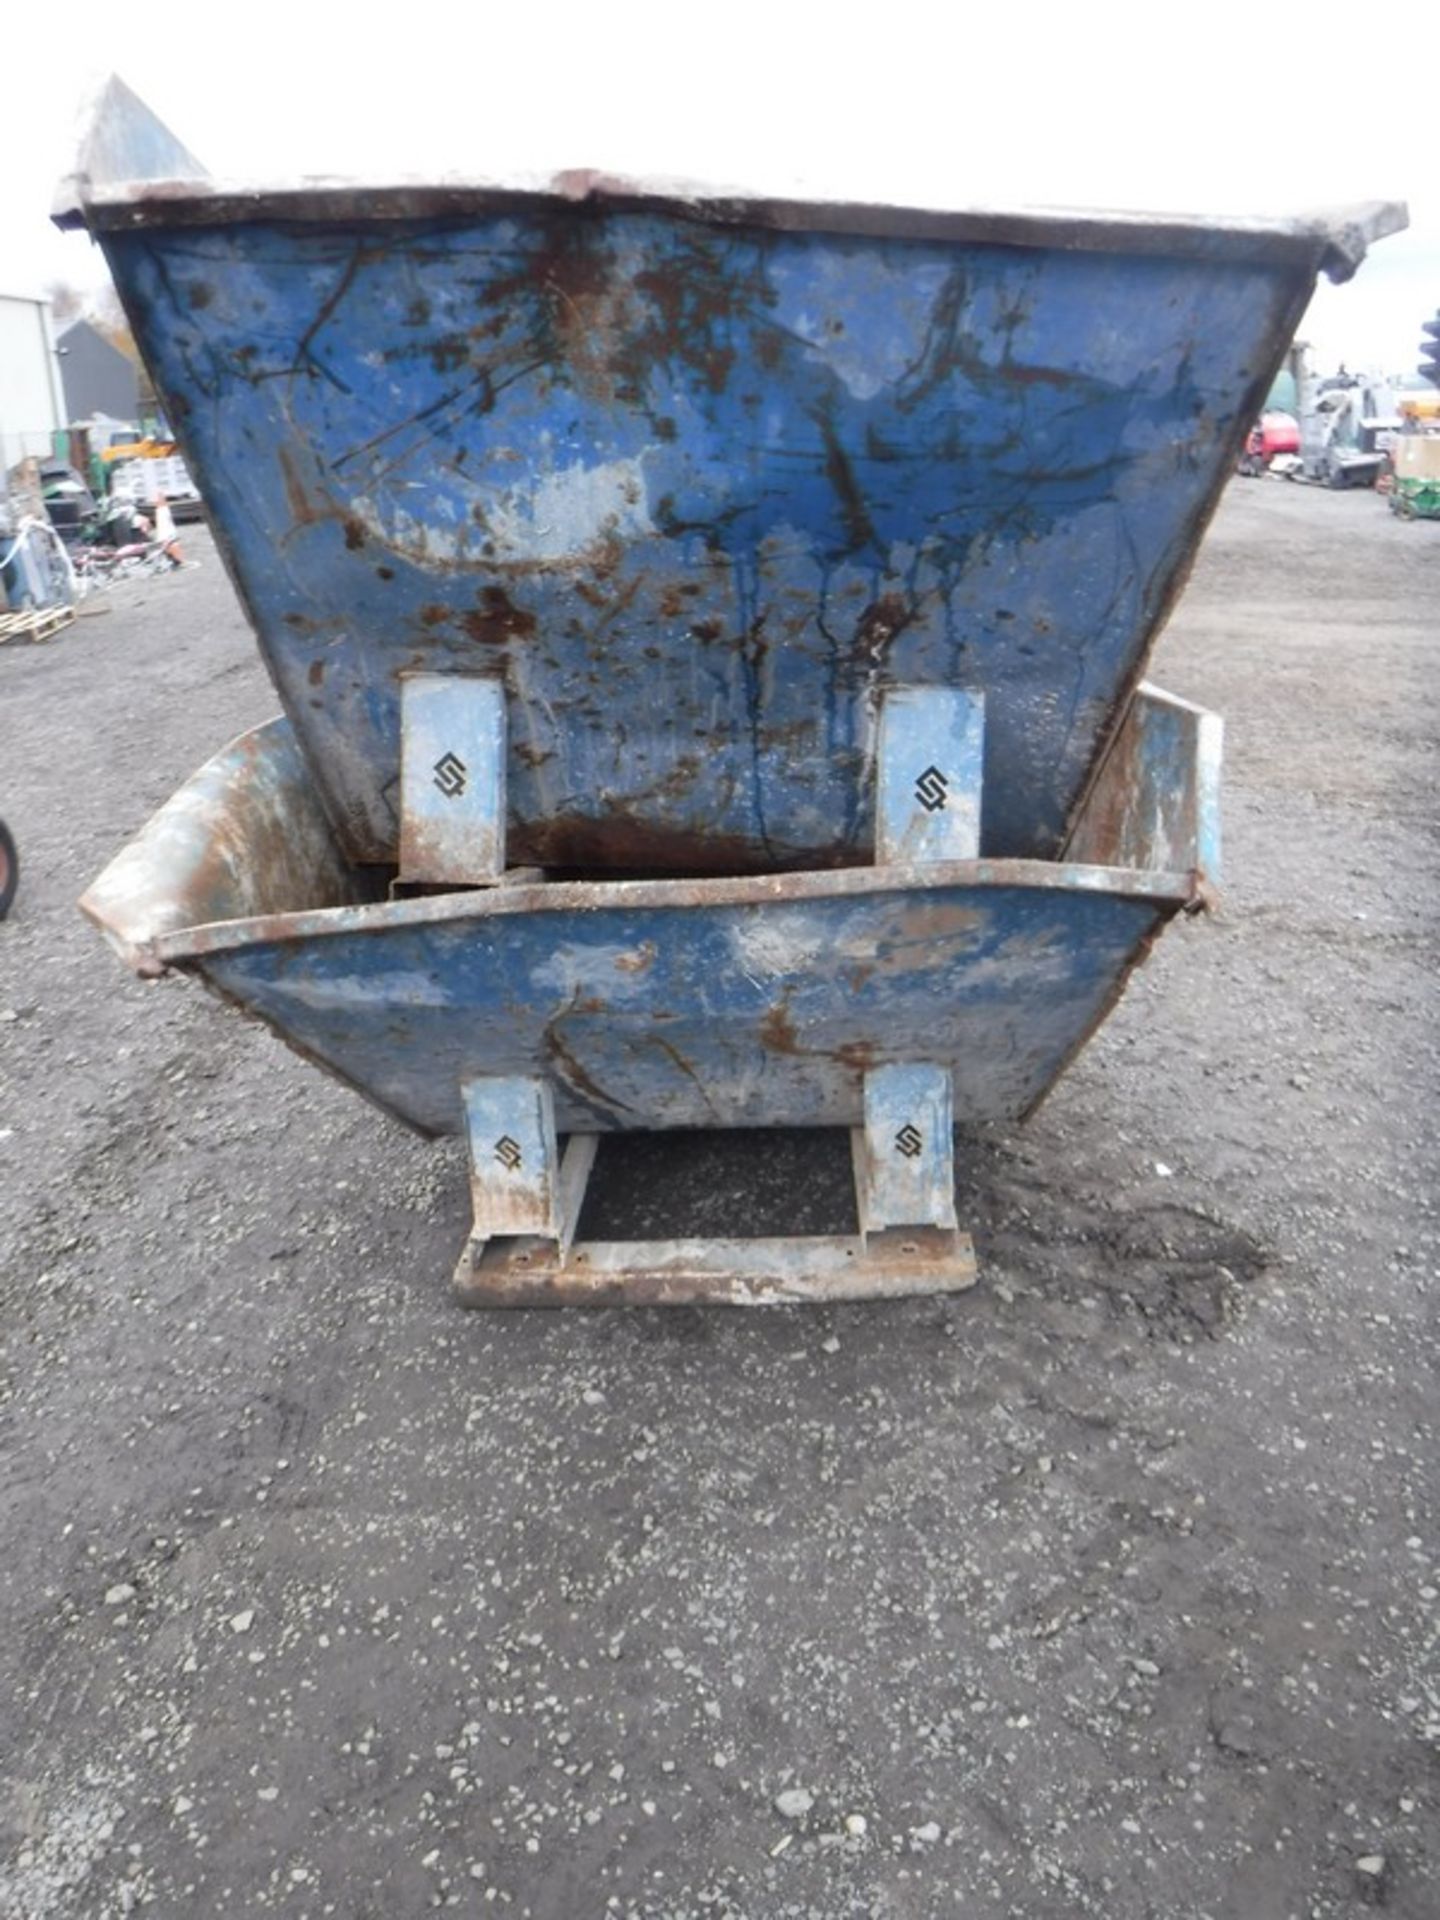 2015 CONQUIP 1200ltr tipping skips x 2 S/N CQ45589 & CQ47577 - Image 4 of 6